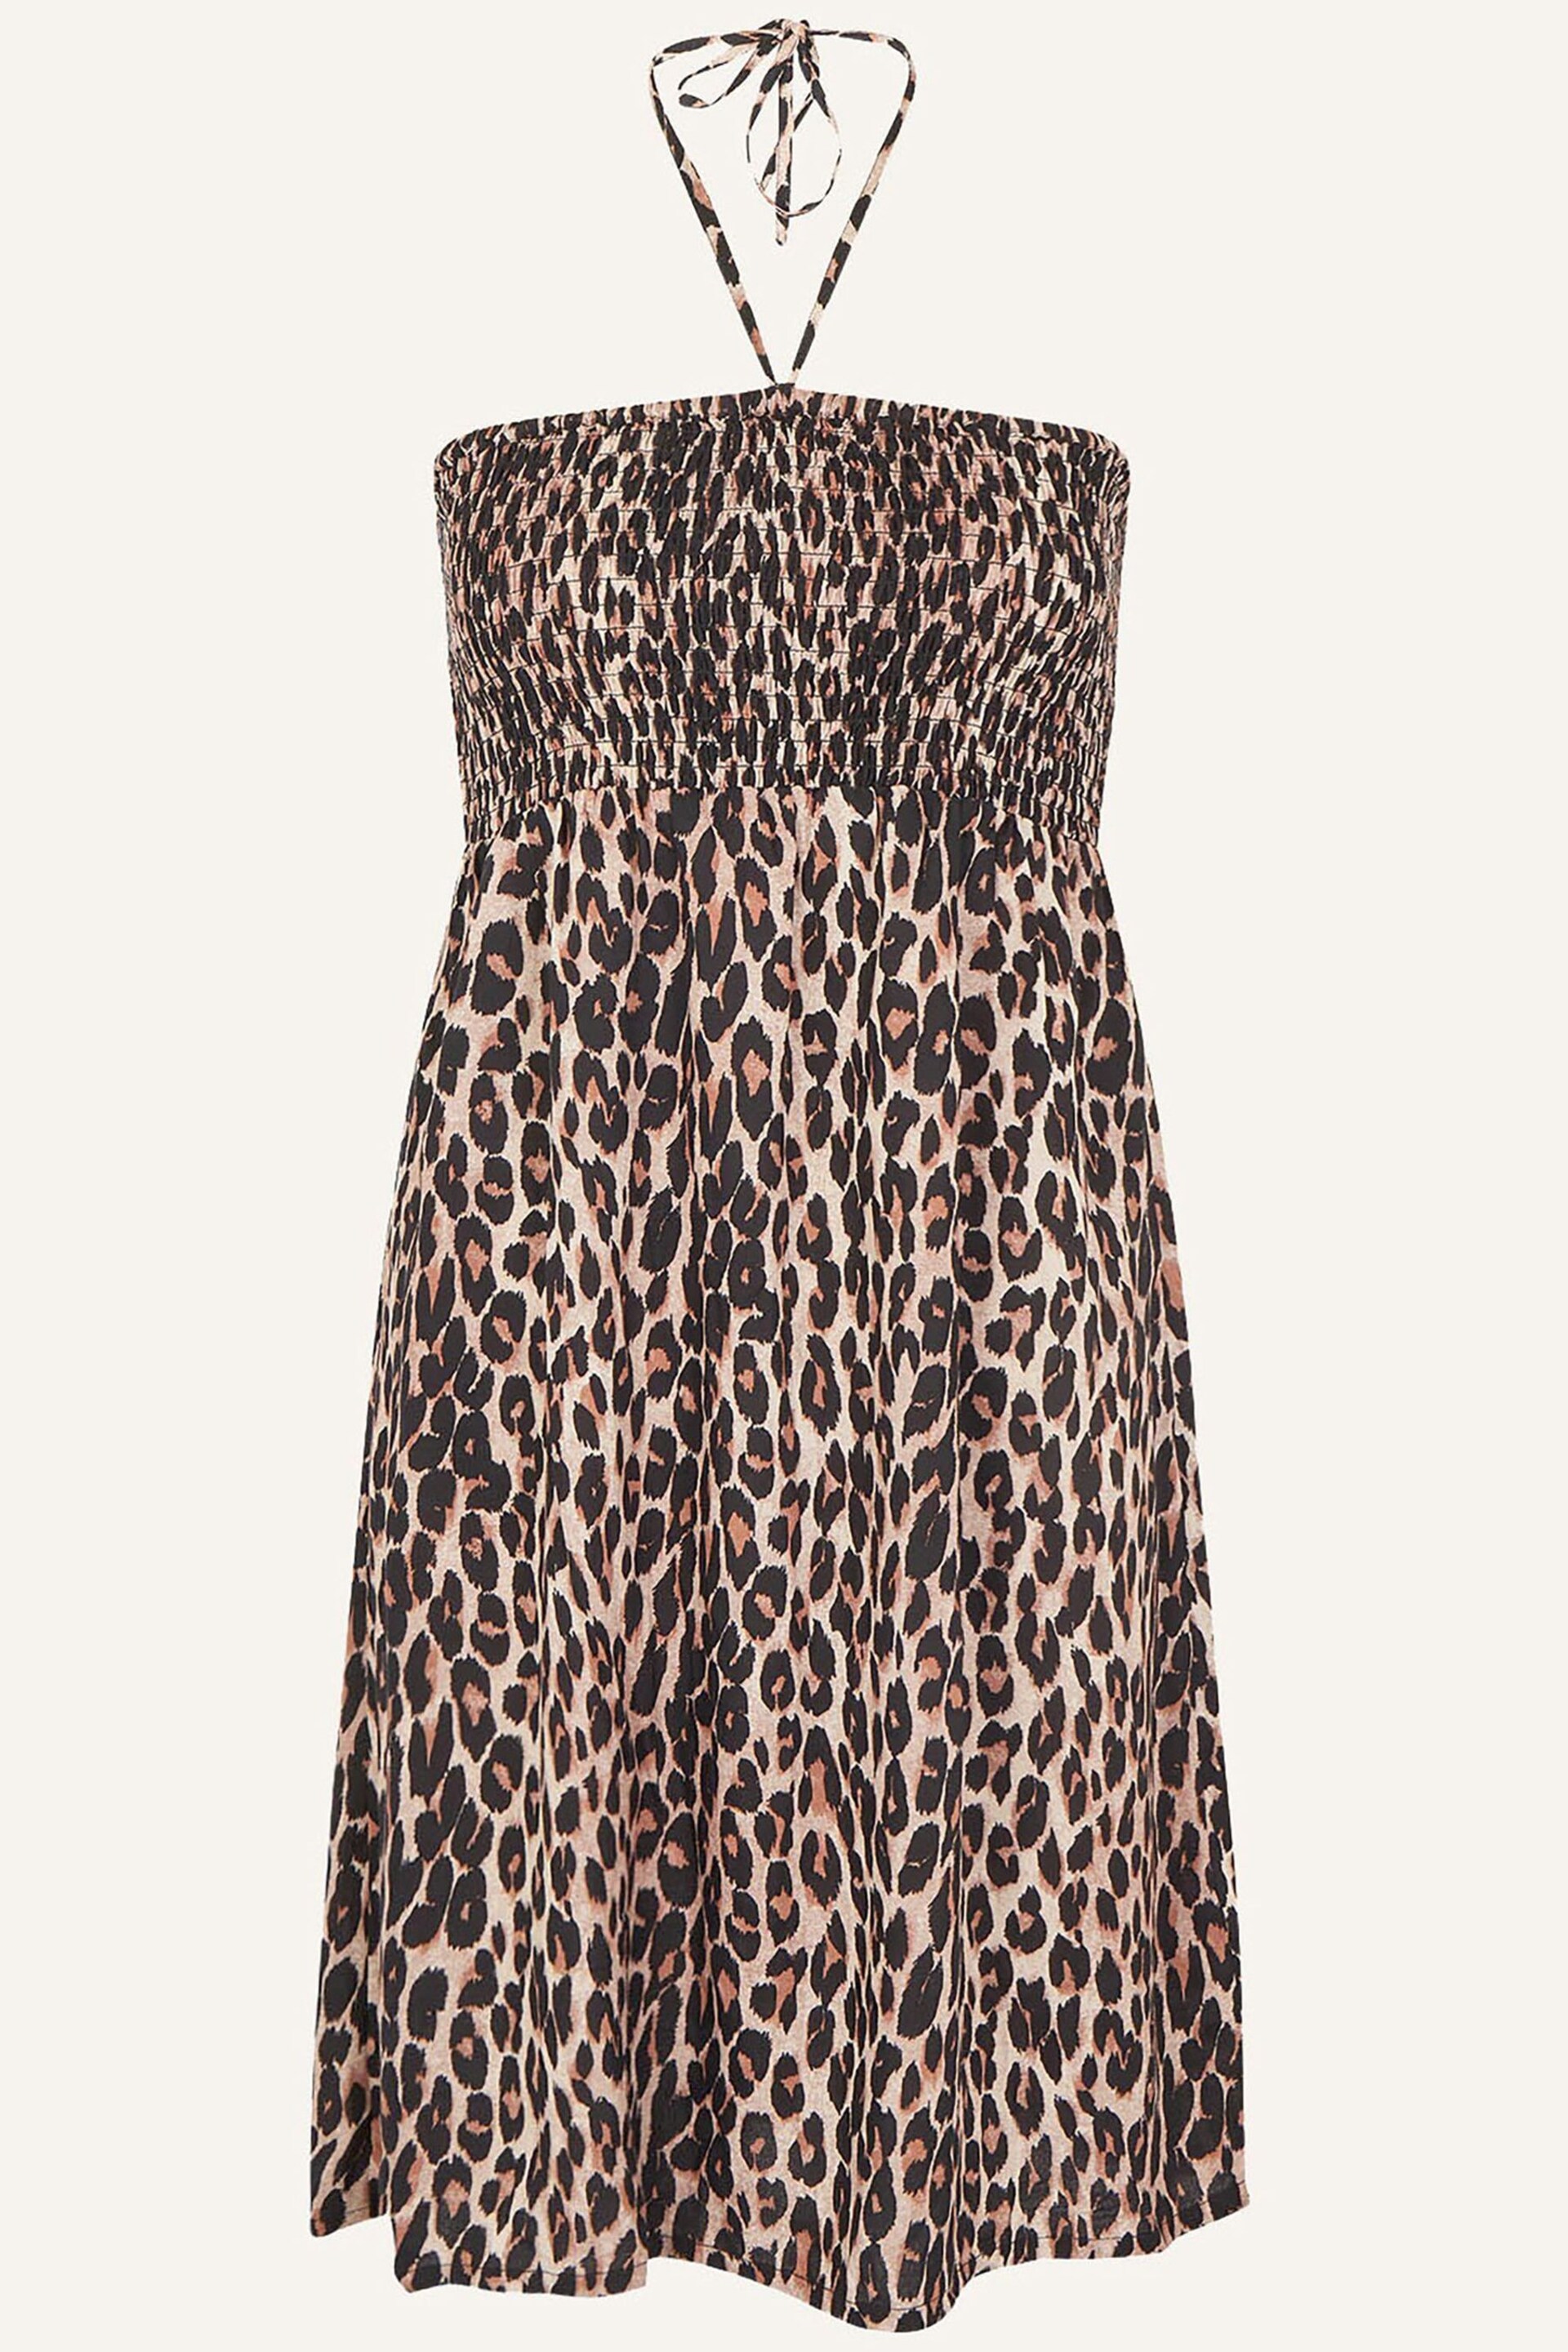 Accessorize Brown Leopard Print Bandeau Dress in Lenzing™ EcoVero™ - Image 4 of 4